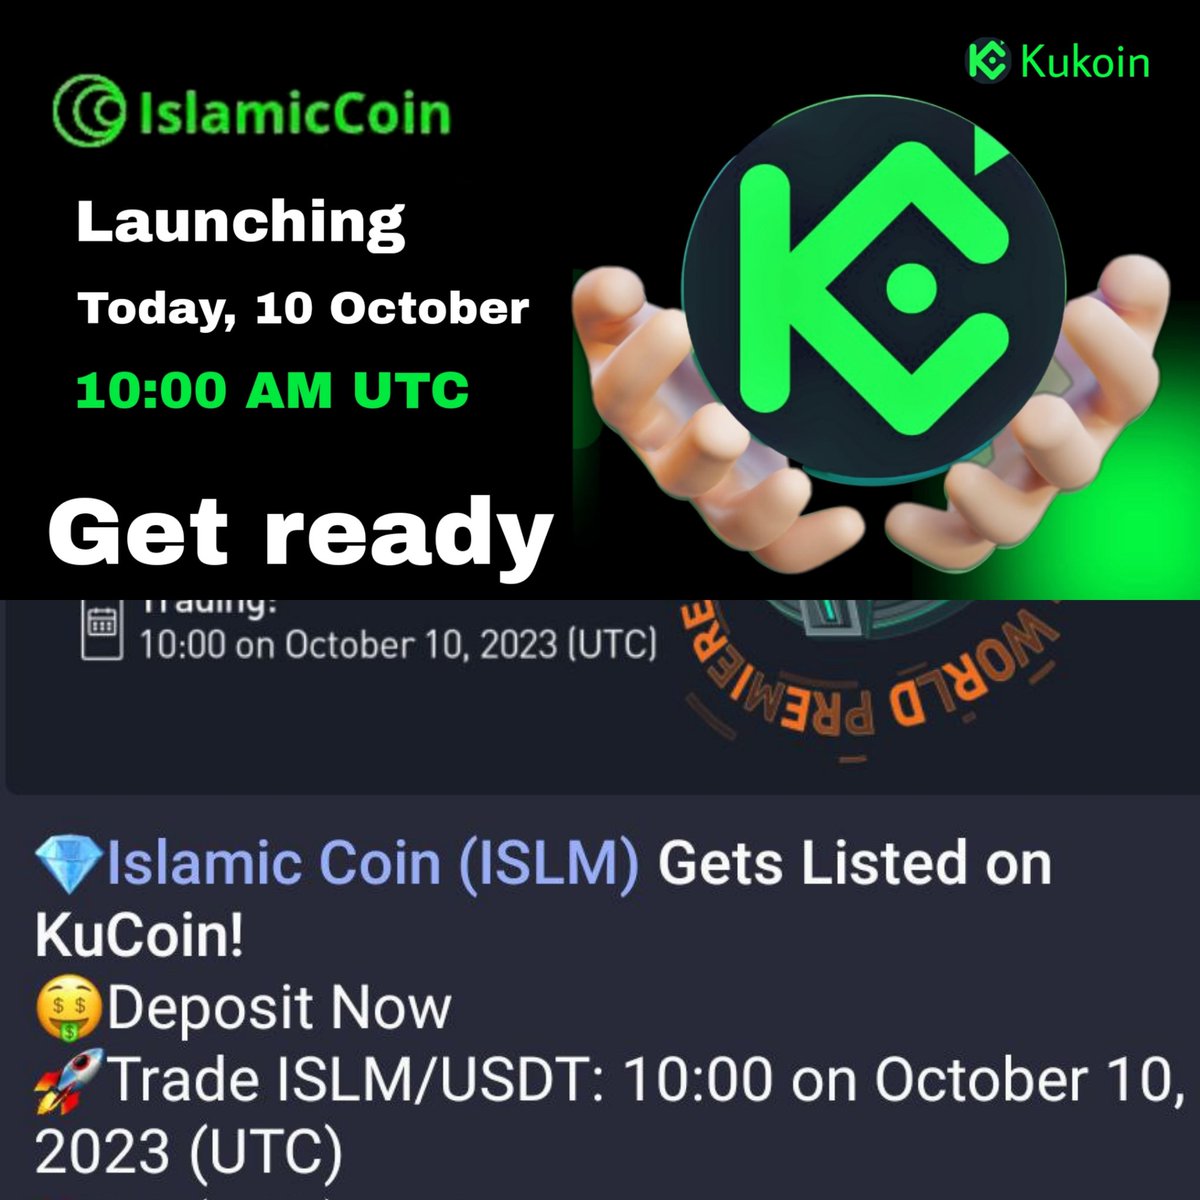 📣 #ISLM listing on @kucoincom  today being October 10, at 10:00 AM UTC 
Few minutes to go guys 🔥🔥🔥🚀✅

Deposits for #ISLM are open now.

Get ready  for  🚀 moon 🌝🌝🌙

#IslamicCoin #HAQQ
#ISLM #CryptoNews    #HAQQNetwork  #oriele #الهلال_الاتفاق #حادث_الفاشينيستا 
#طرابزون